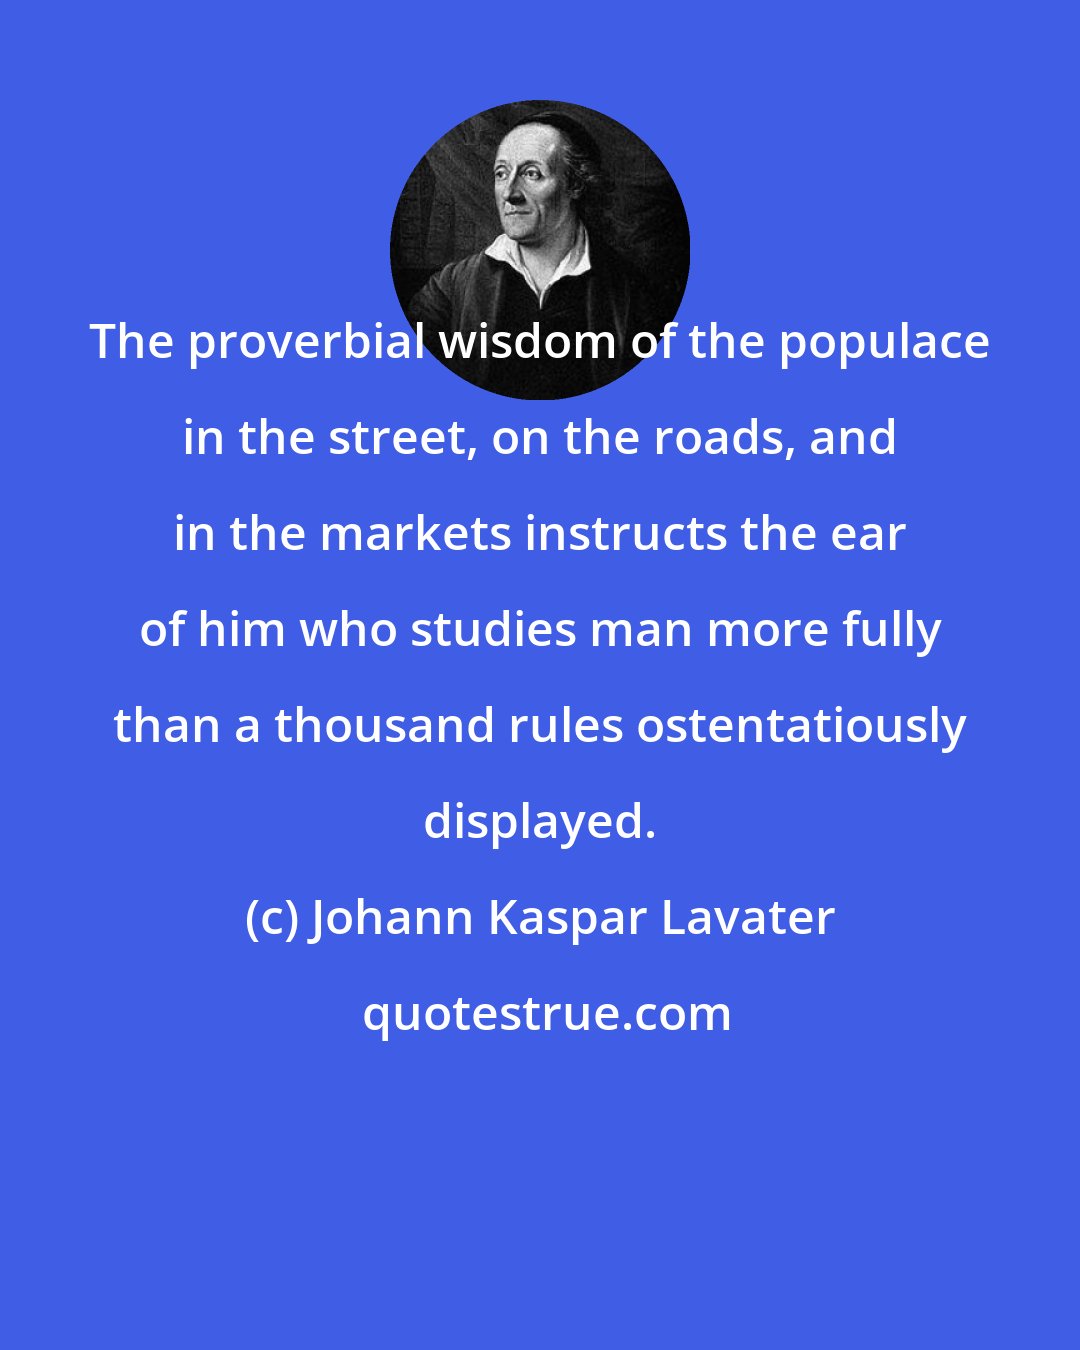 Johann Kaspar Lavater: The proverbial wisdom of the populace in the street, on the roads, and in the markets instructs the ear of him who studies man more fully than a thousand rules ostentatiously displayed.